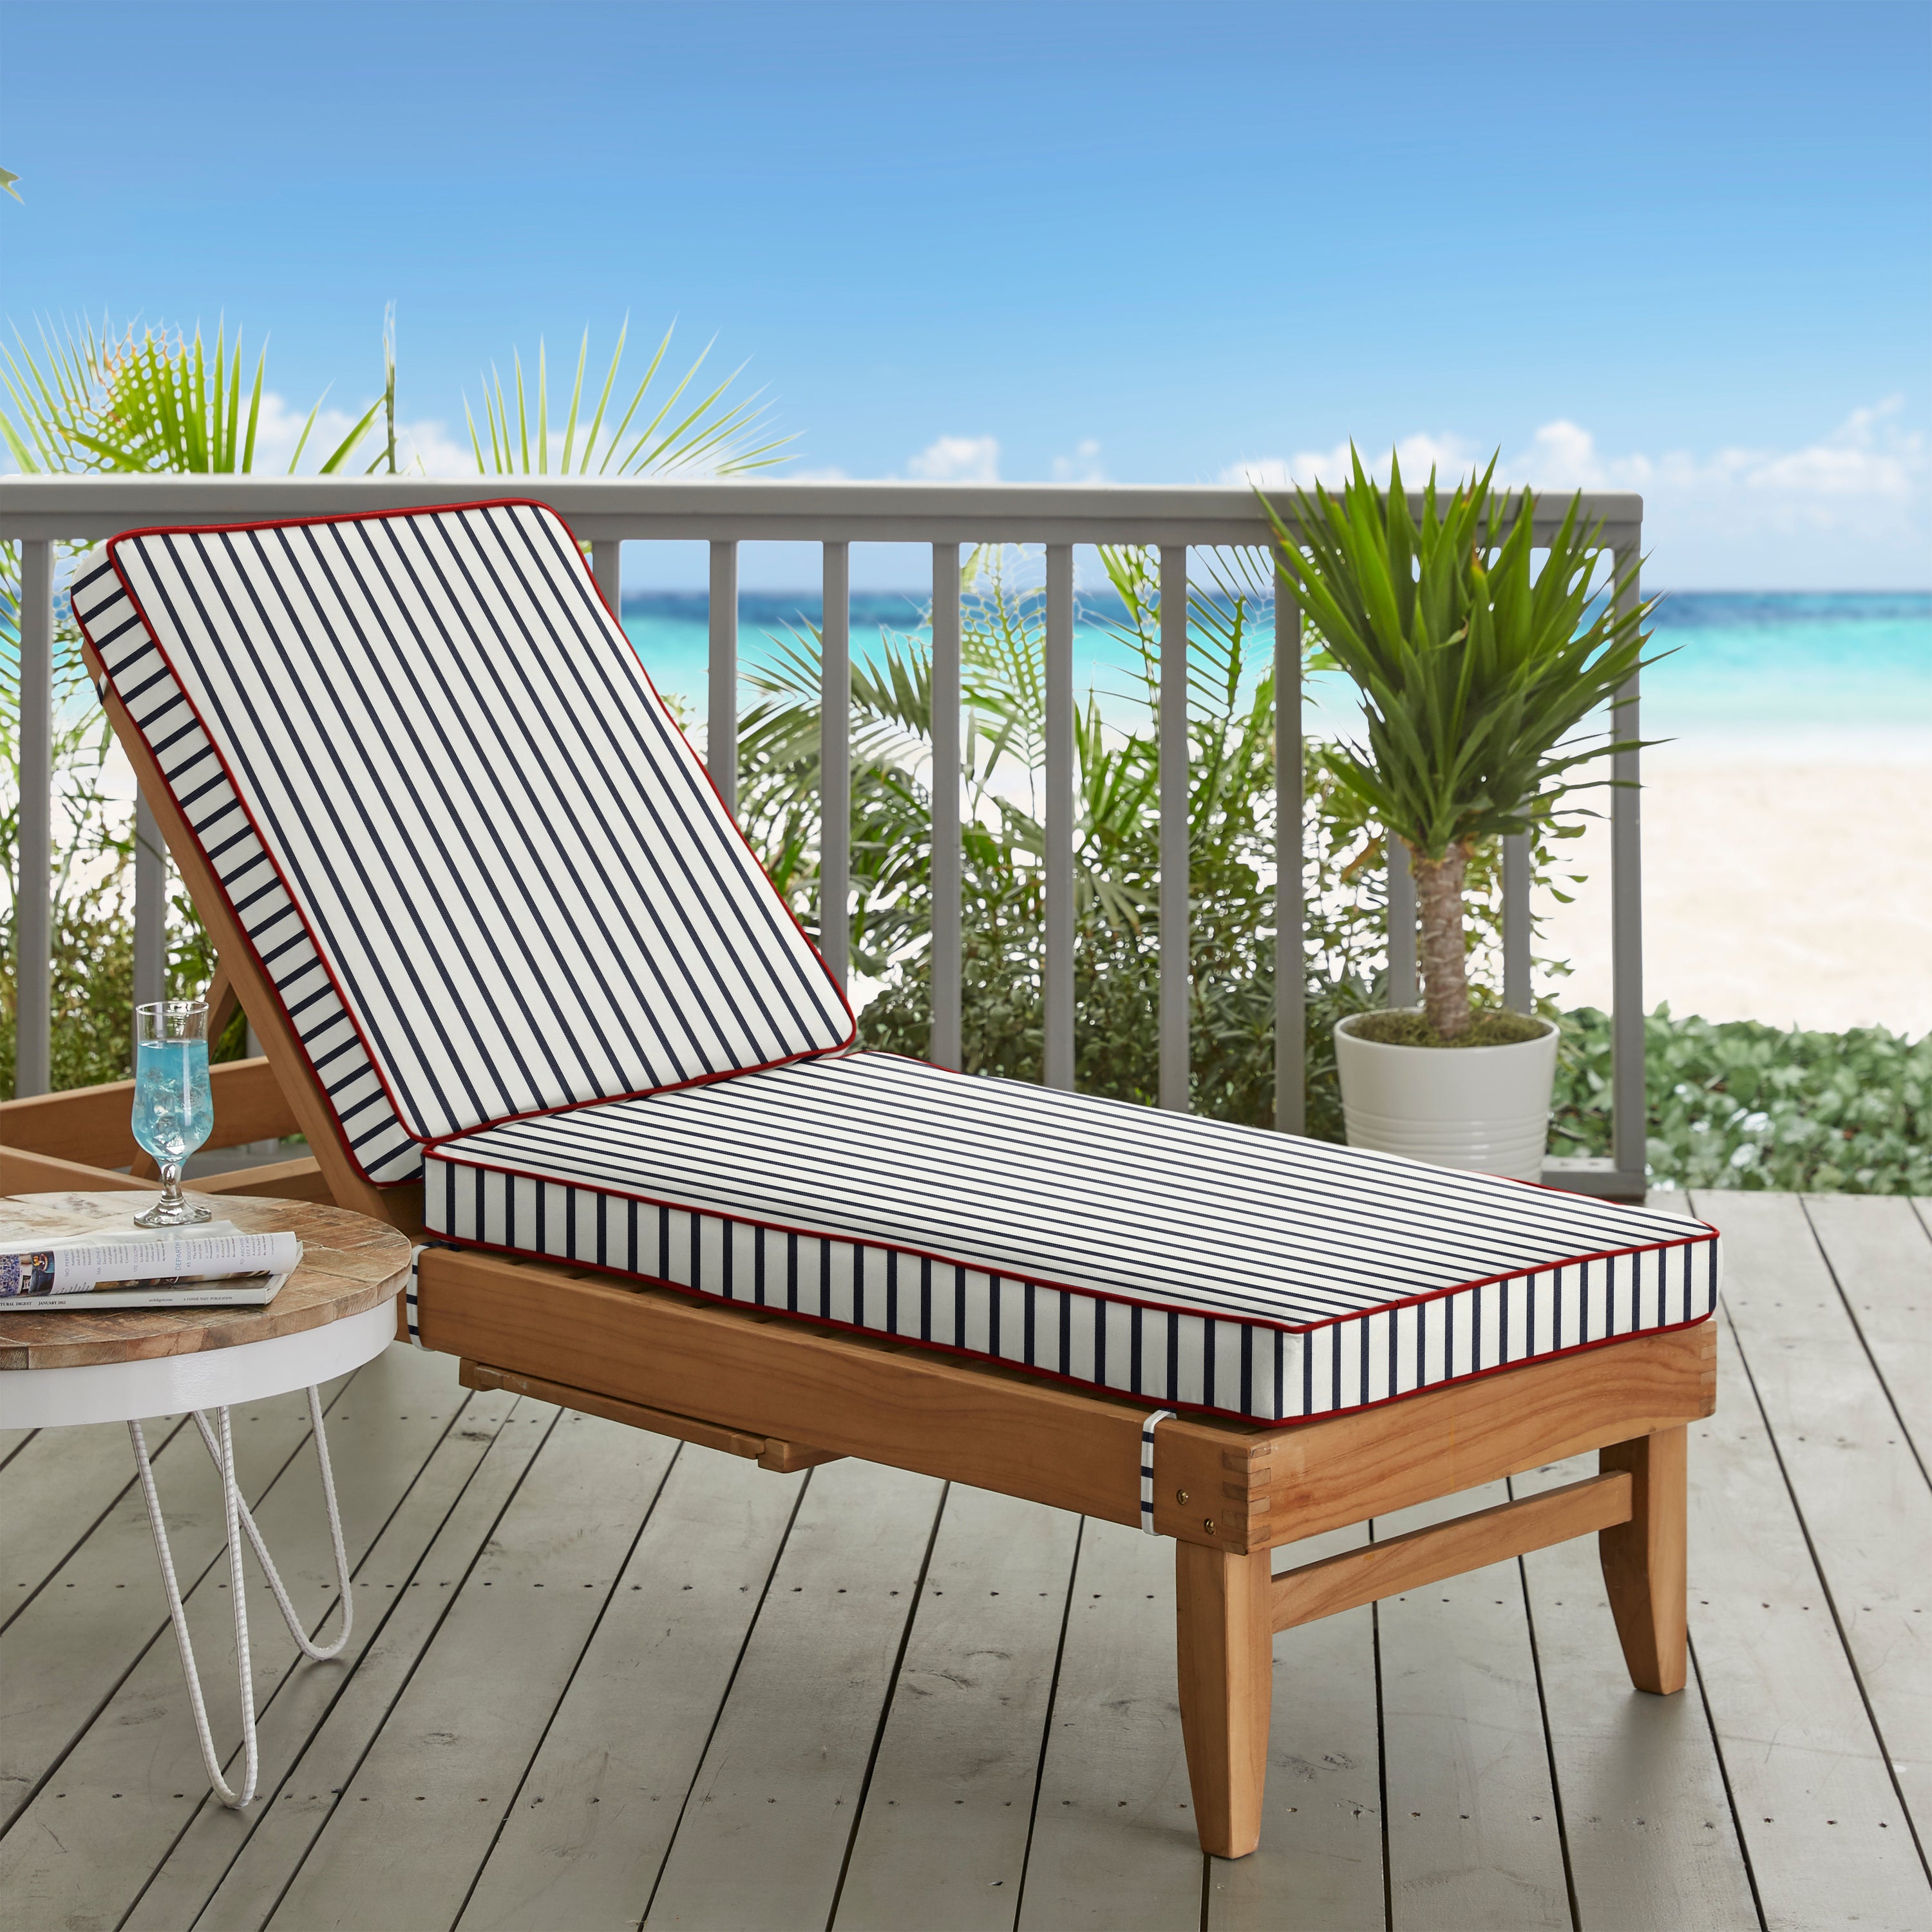 Sunbrella Lido with Contrast Cording Chaise Lounge Cushion